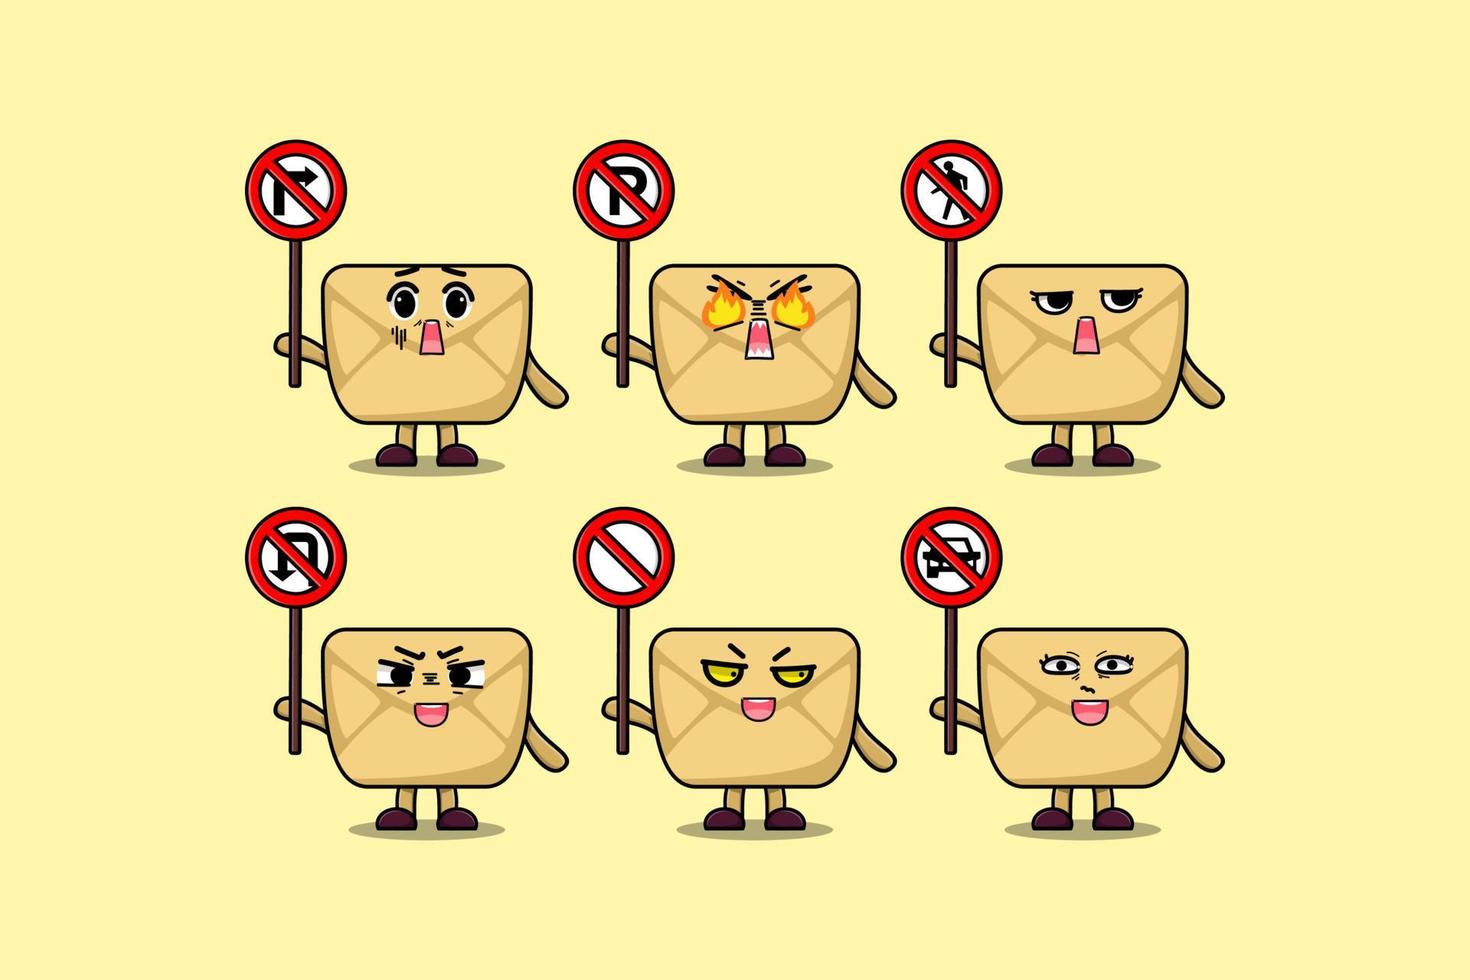 Cute Envelope cartoon character hold traffic sign vector